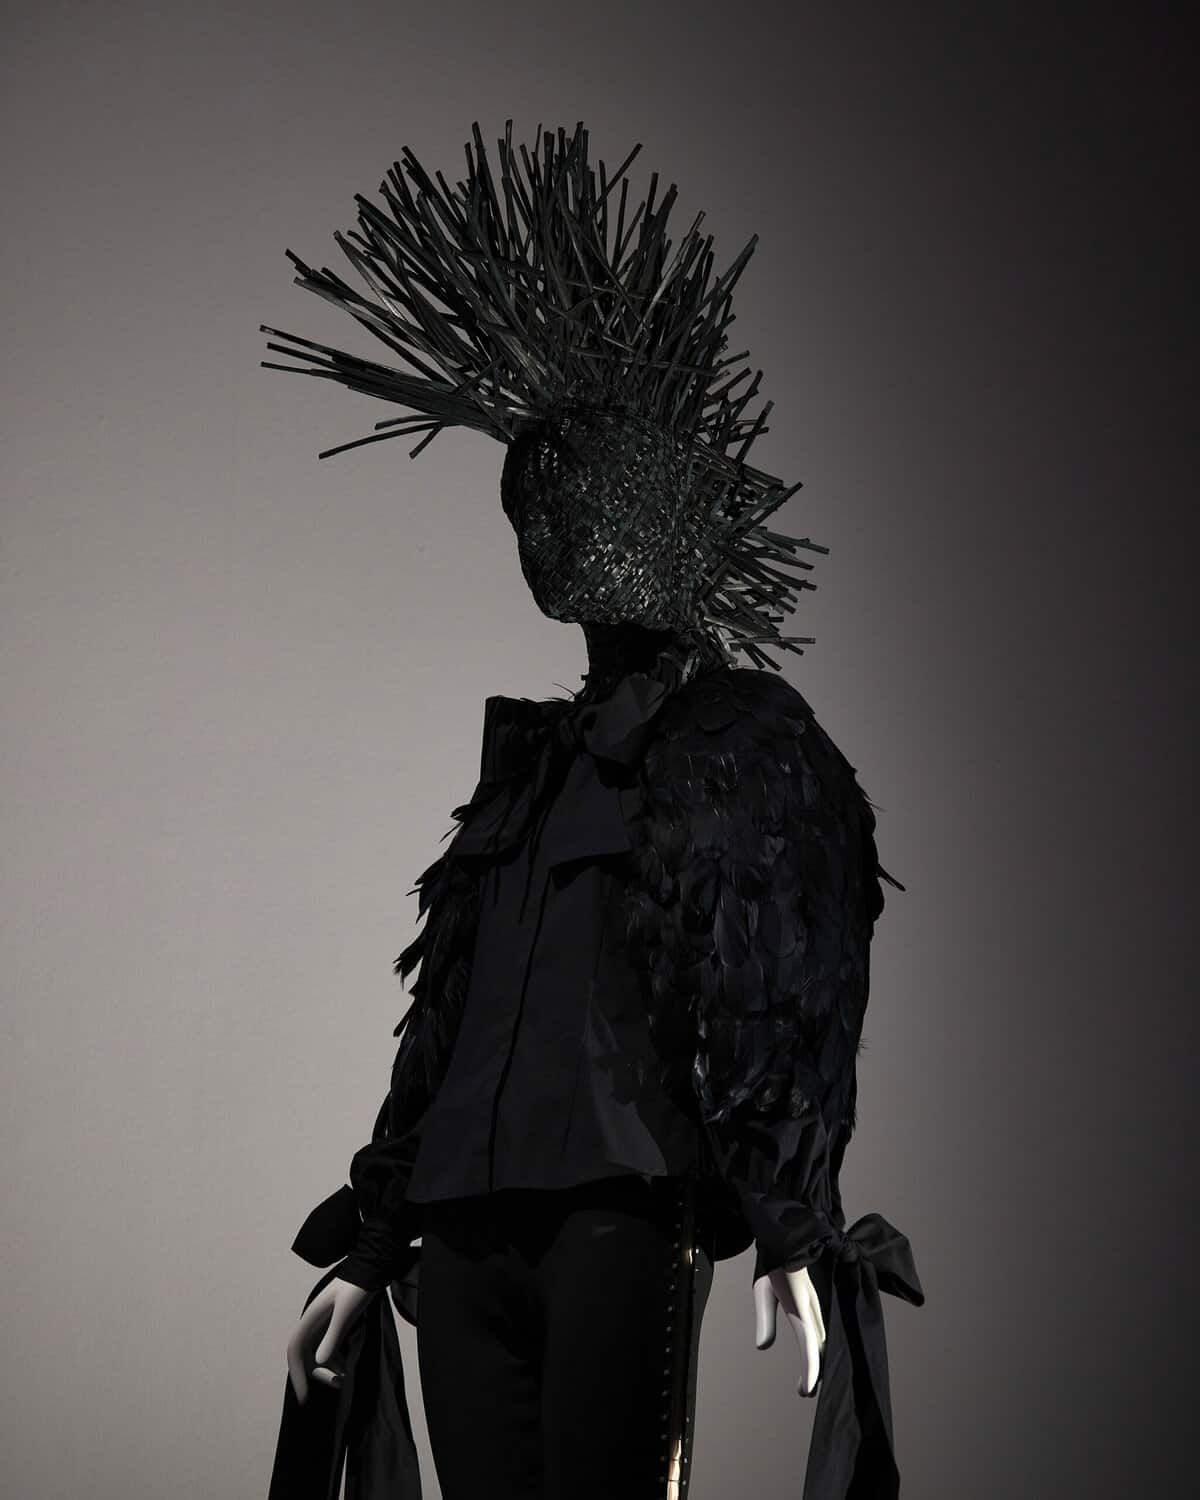 NGV announces Alexander McQueen: Mind, Mythos, Muse exhibition